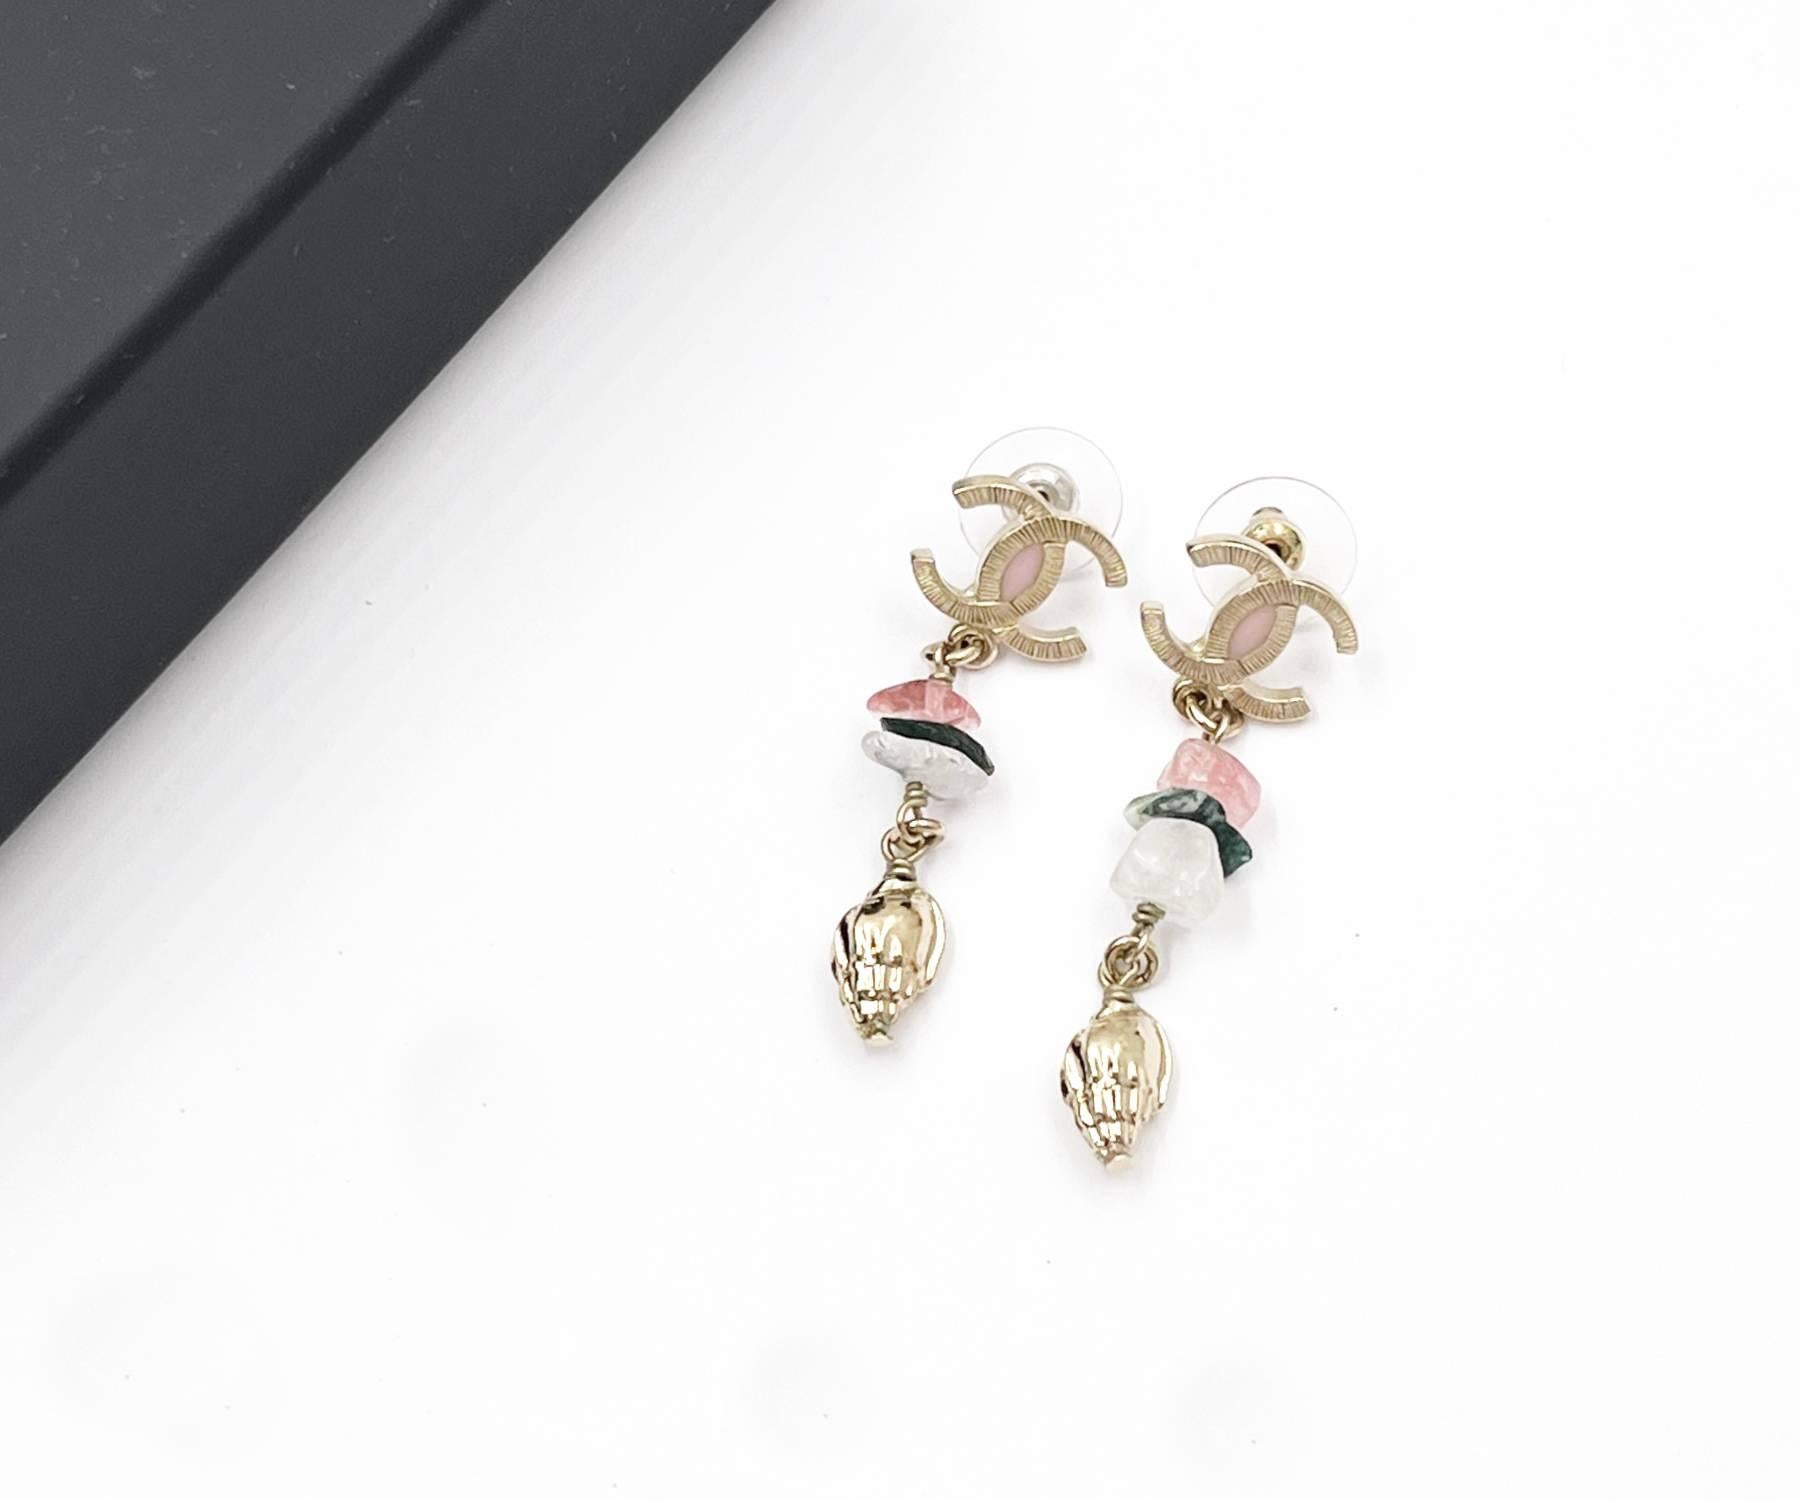 Chanel Gold CC Pink White Stone Shell Dangle Piercing Earrings

* Marked 17
* Made inF France
* Comes with original box, pouch and booklet

-It's approximately 2